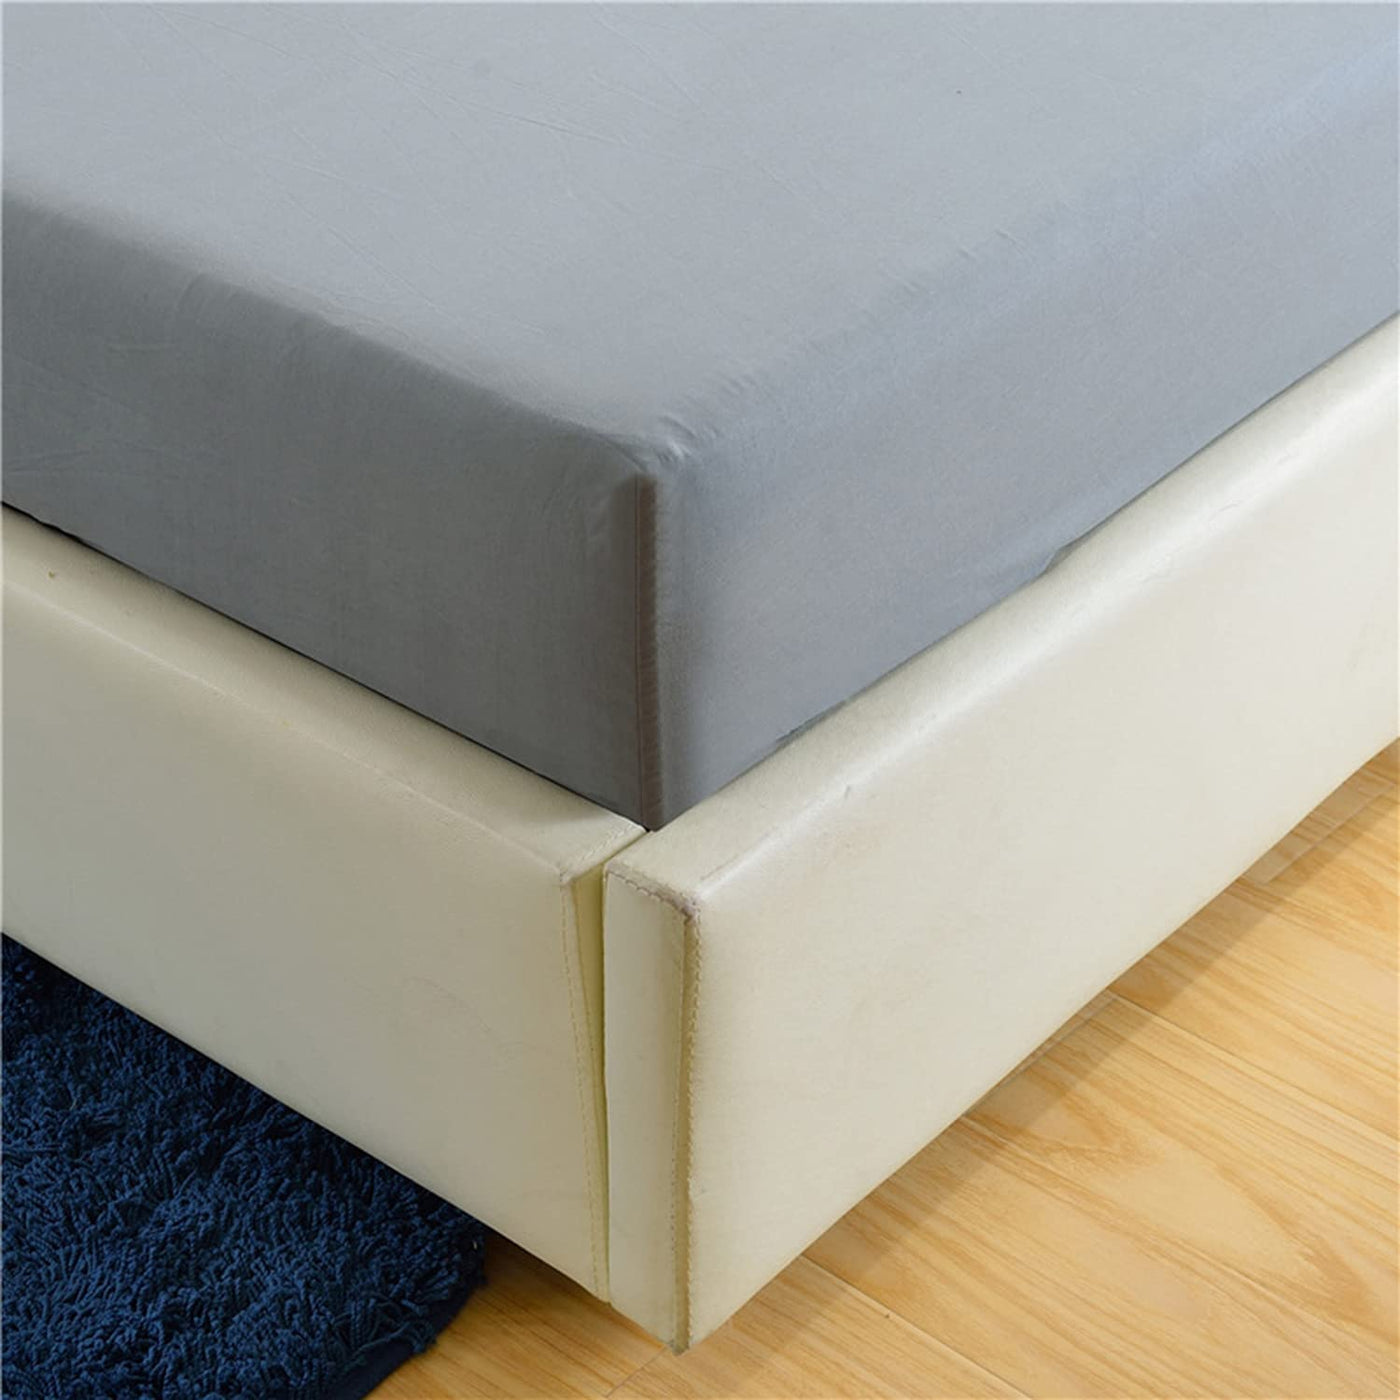 Fitted Bed Sheet - Light Grey